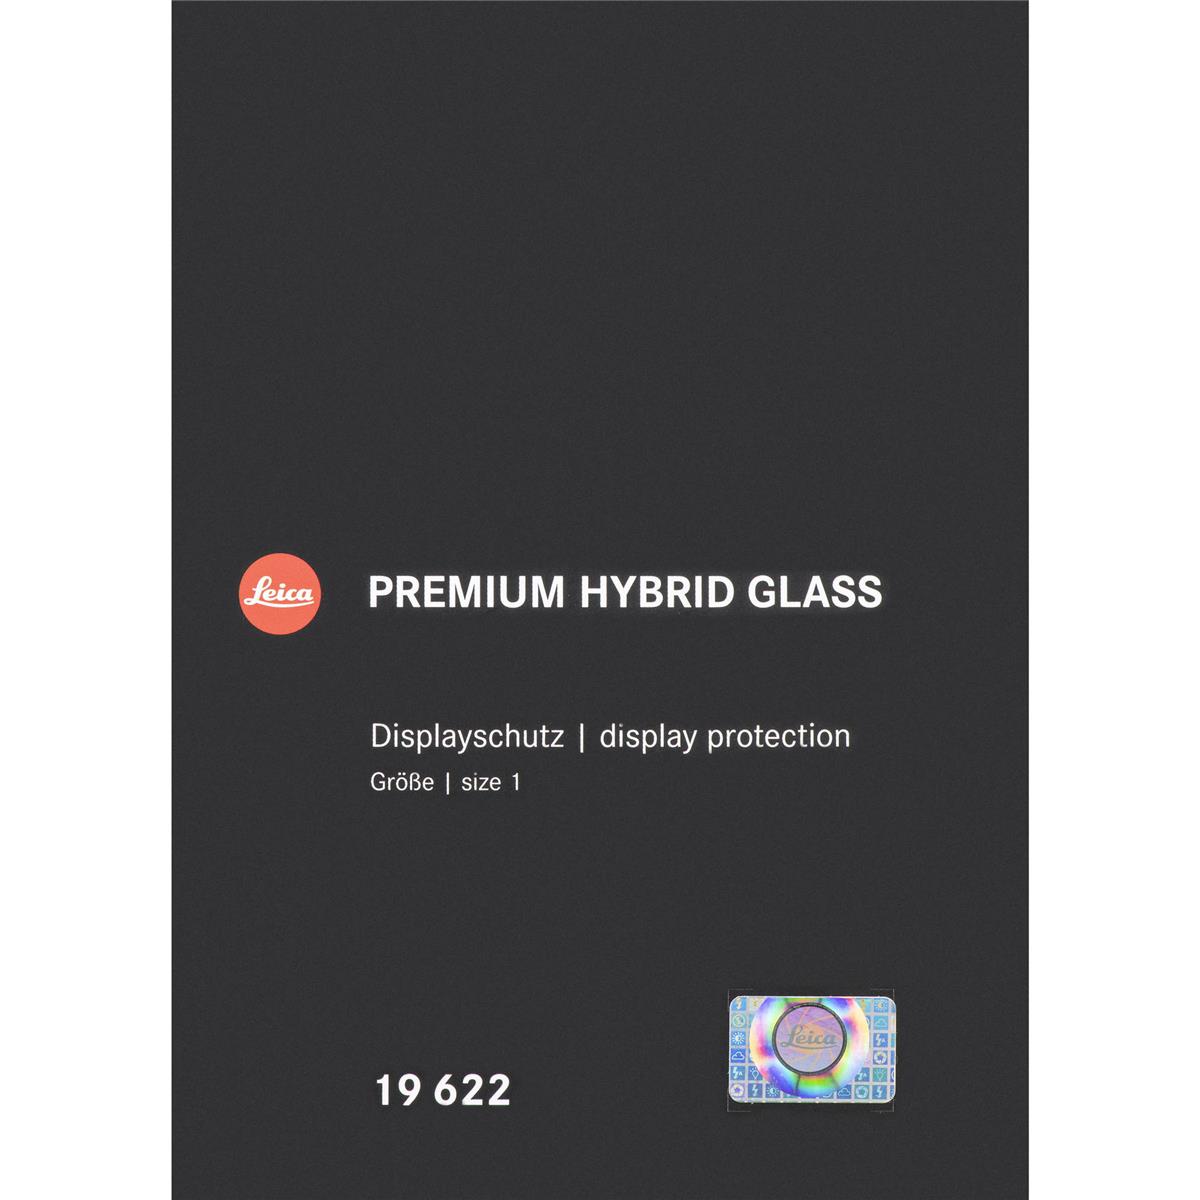 Image of Leica Premium Hybrid Glass Screen Protector for Leica CL/C-Lux/D-Lux 7/V-Lux 5